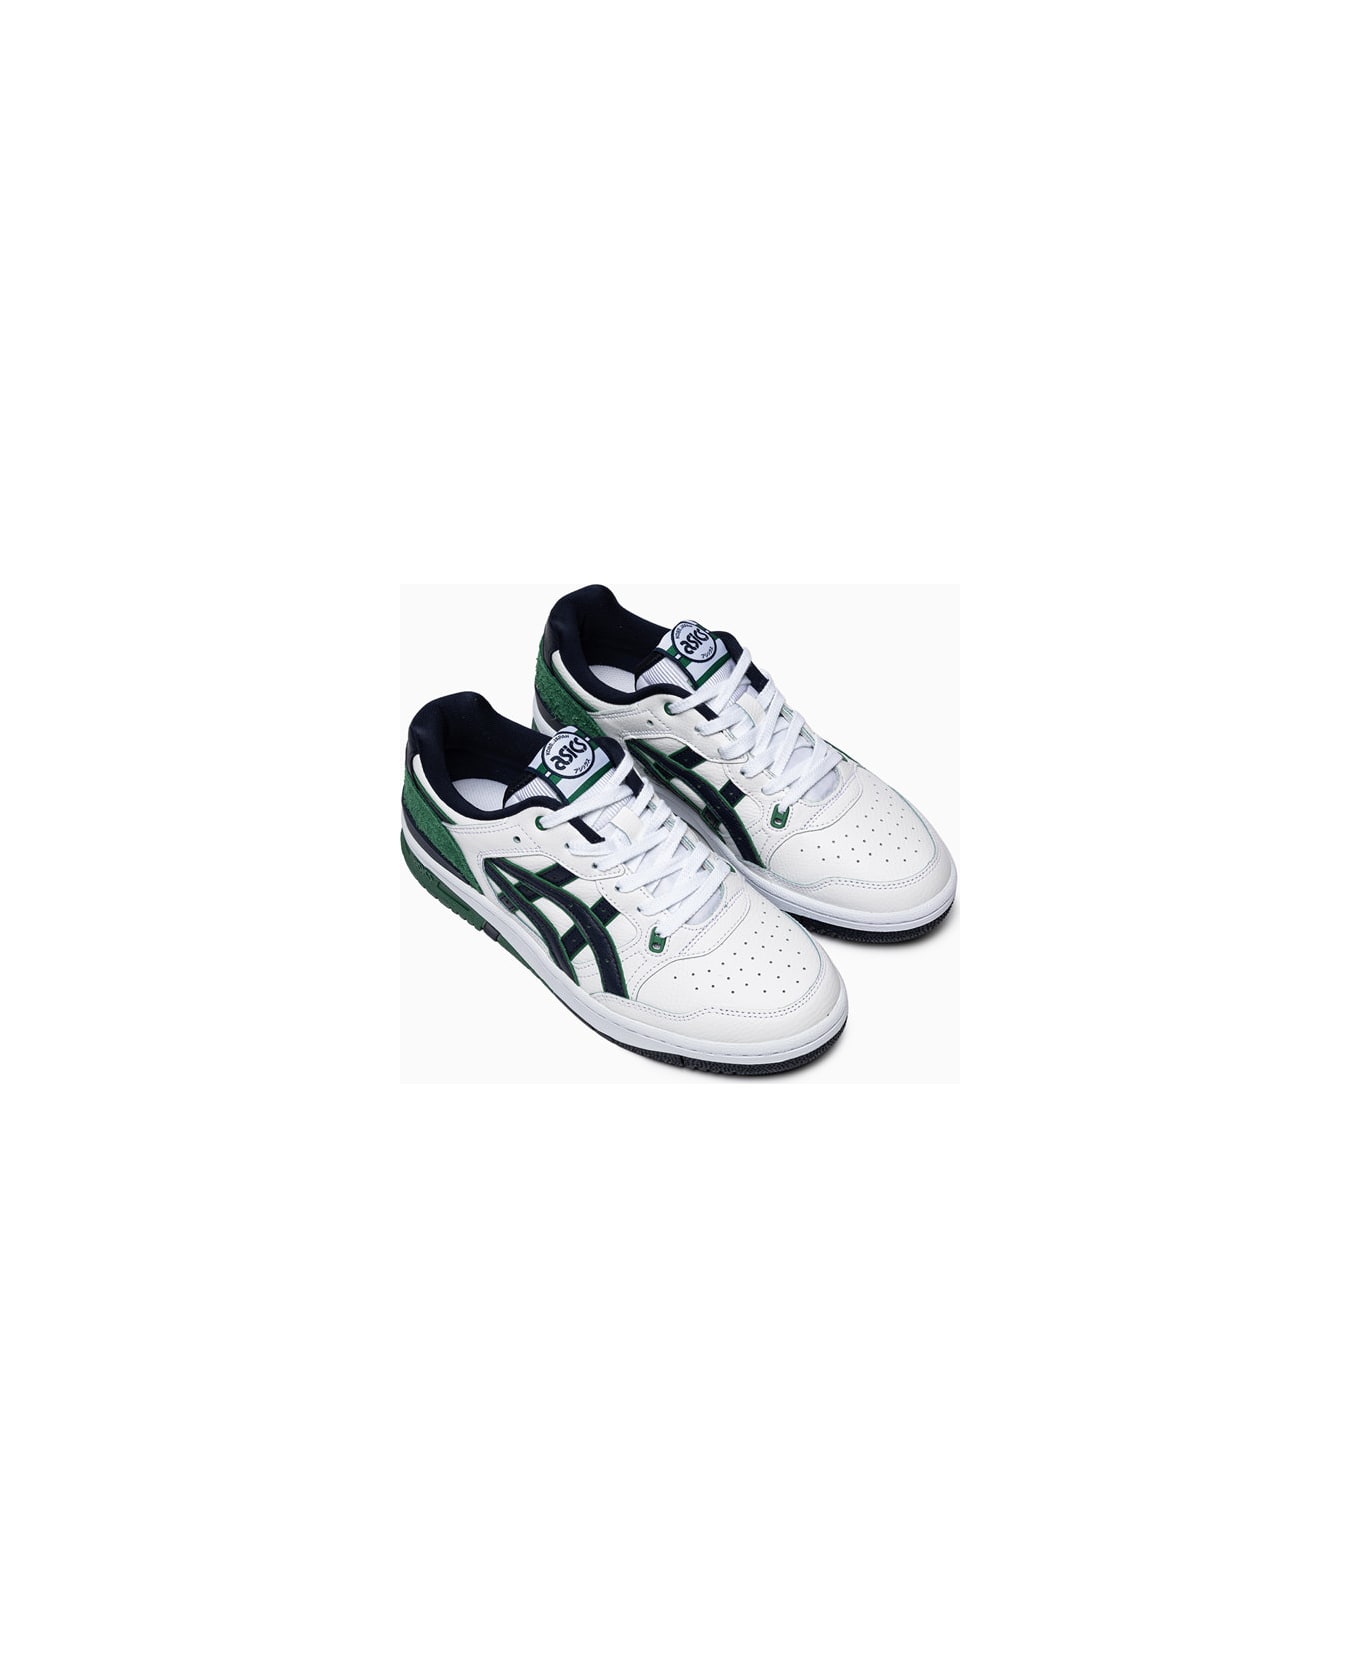 Asics Ex89 Sneakers 1203a268 - White